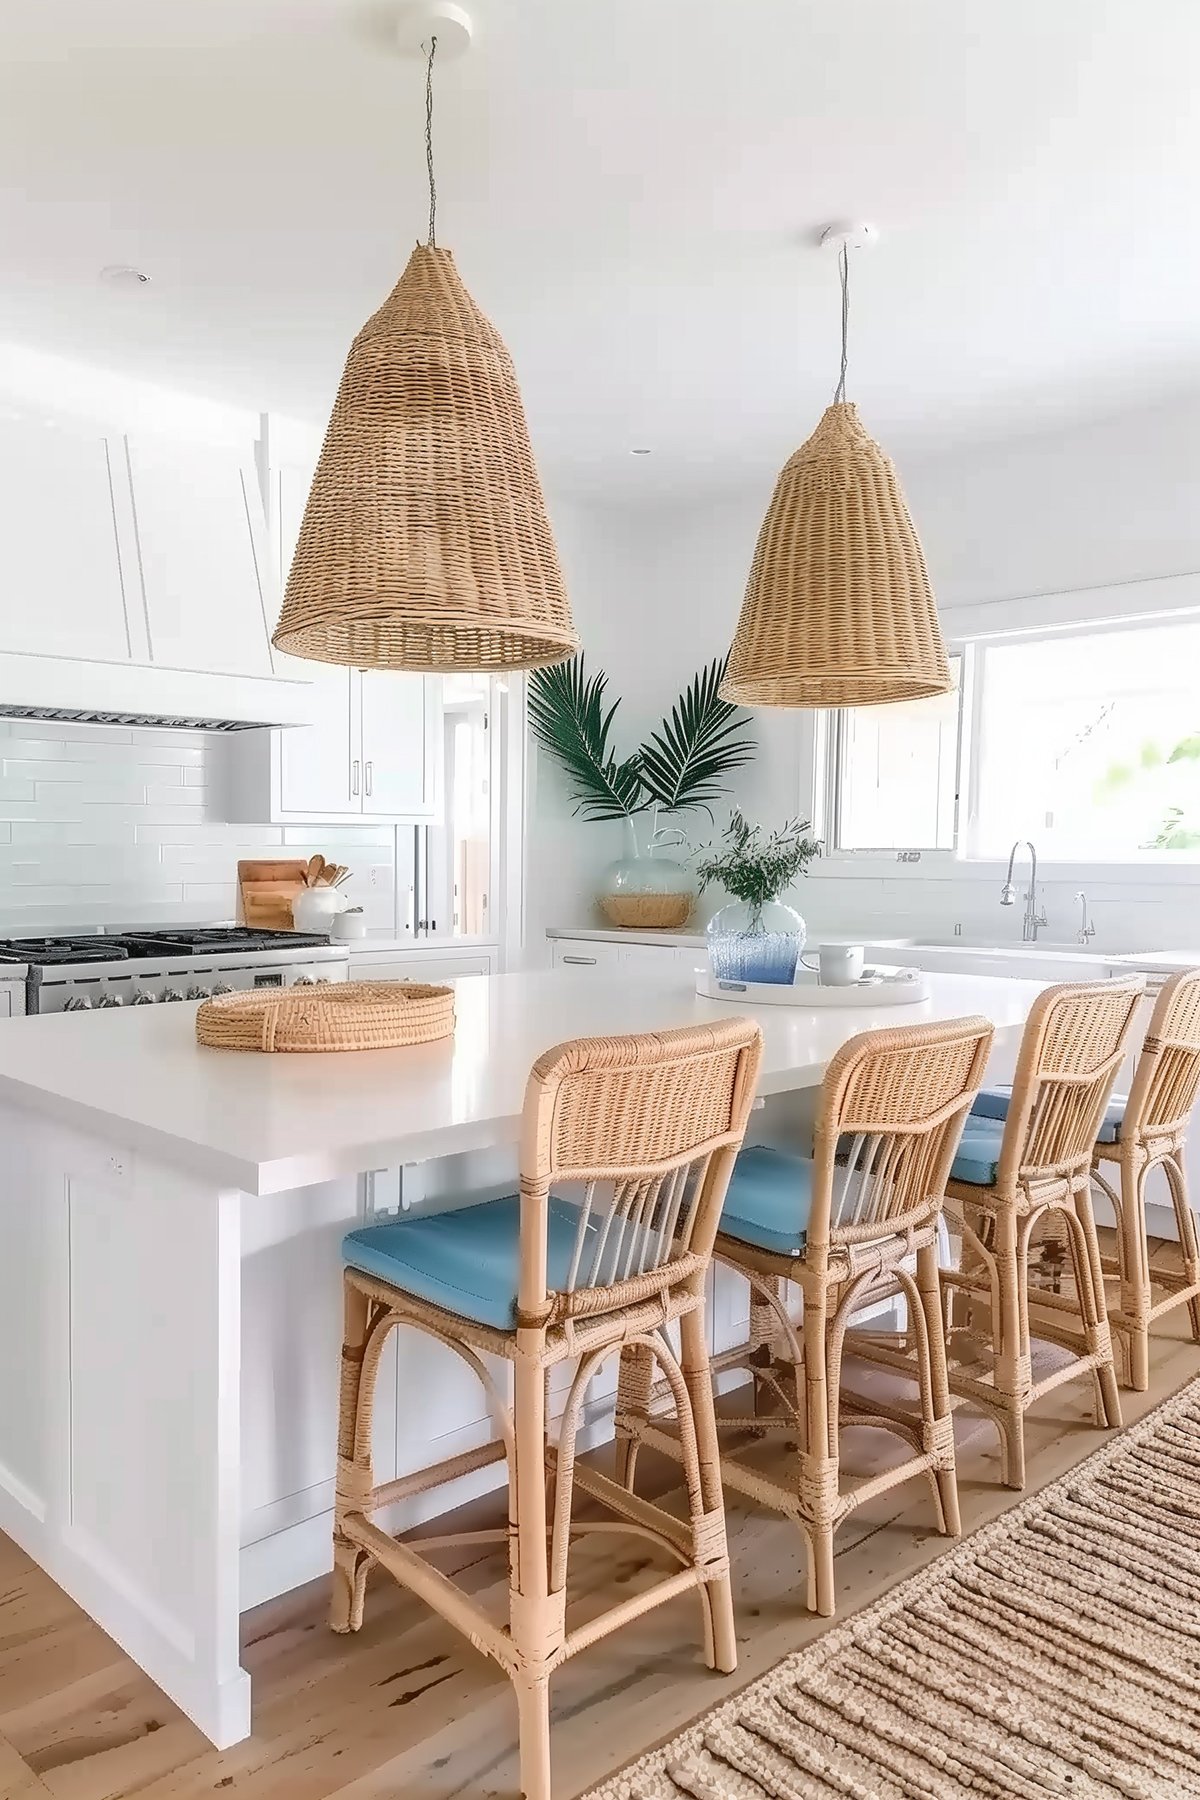 coastal-style kitchen with rattan barstools and pendant lights.